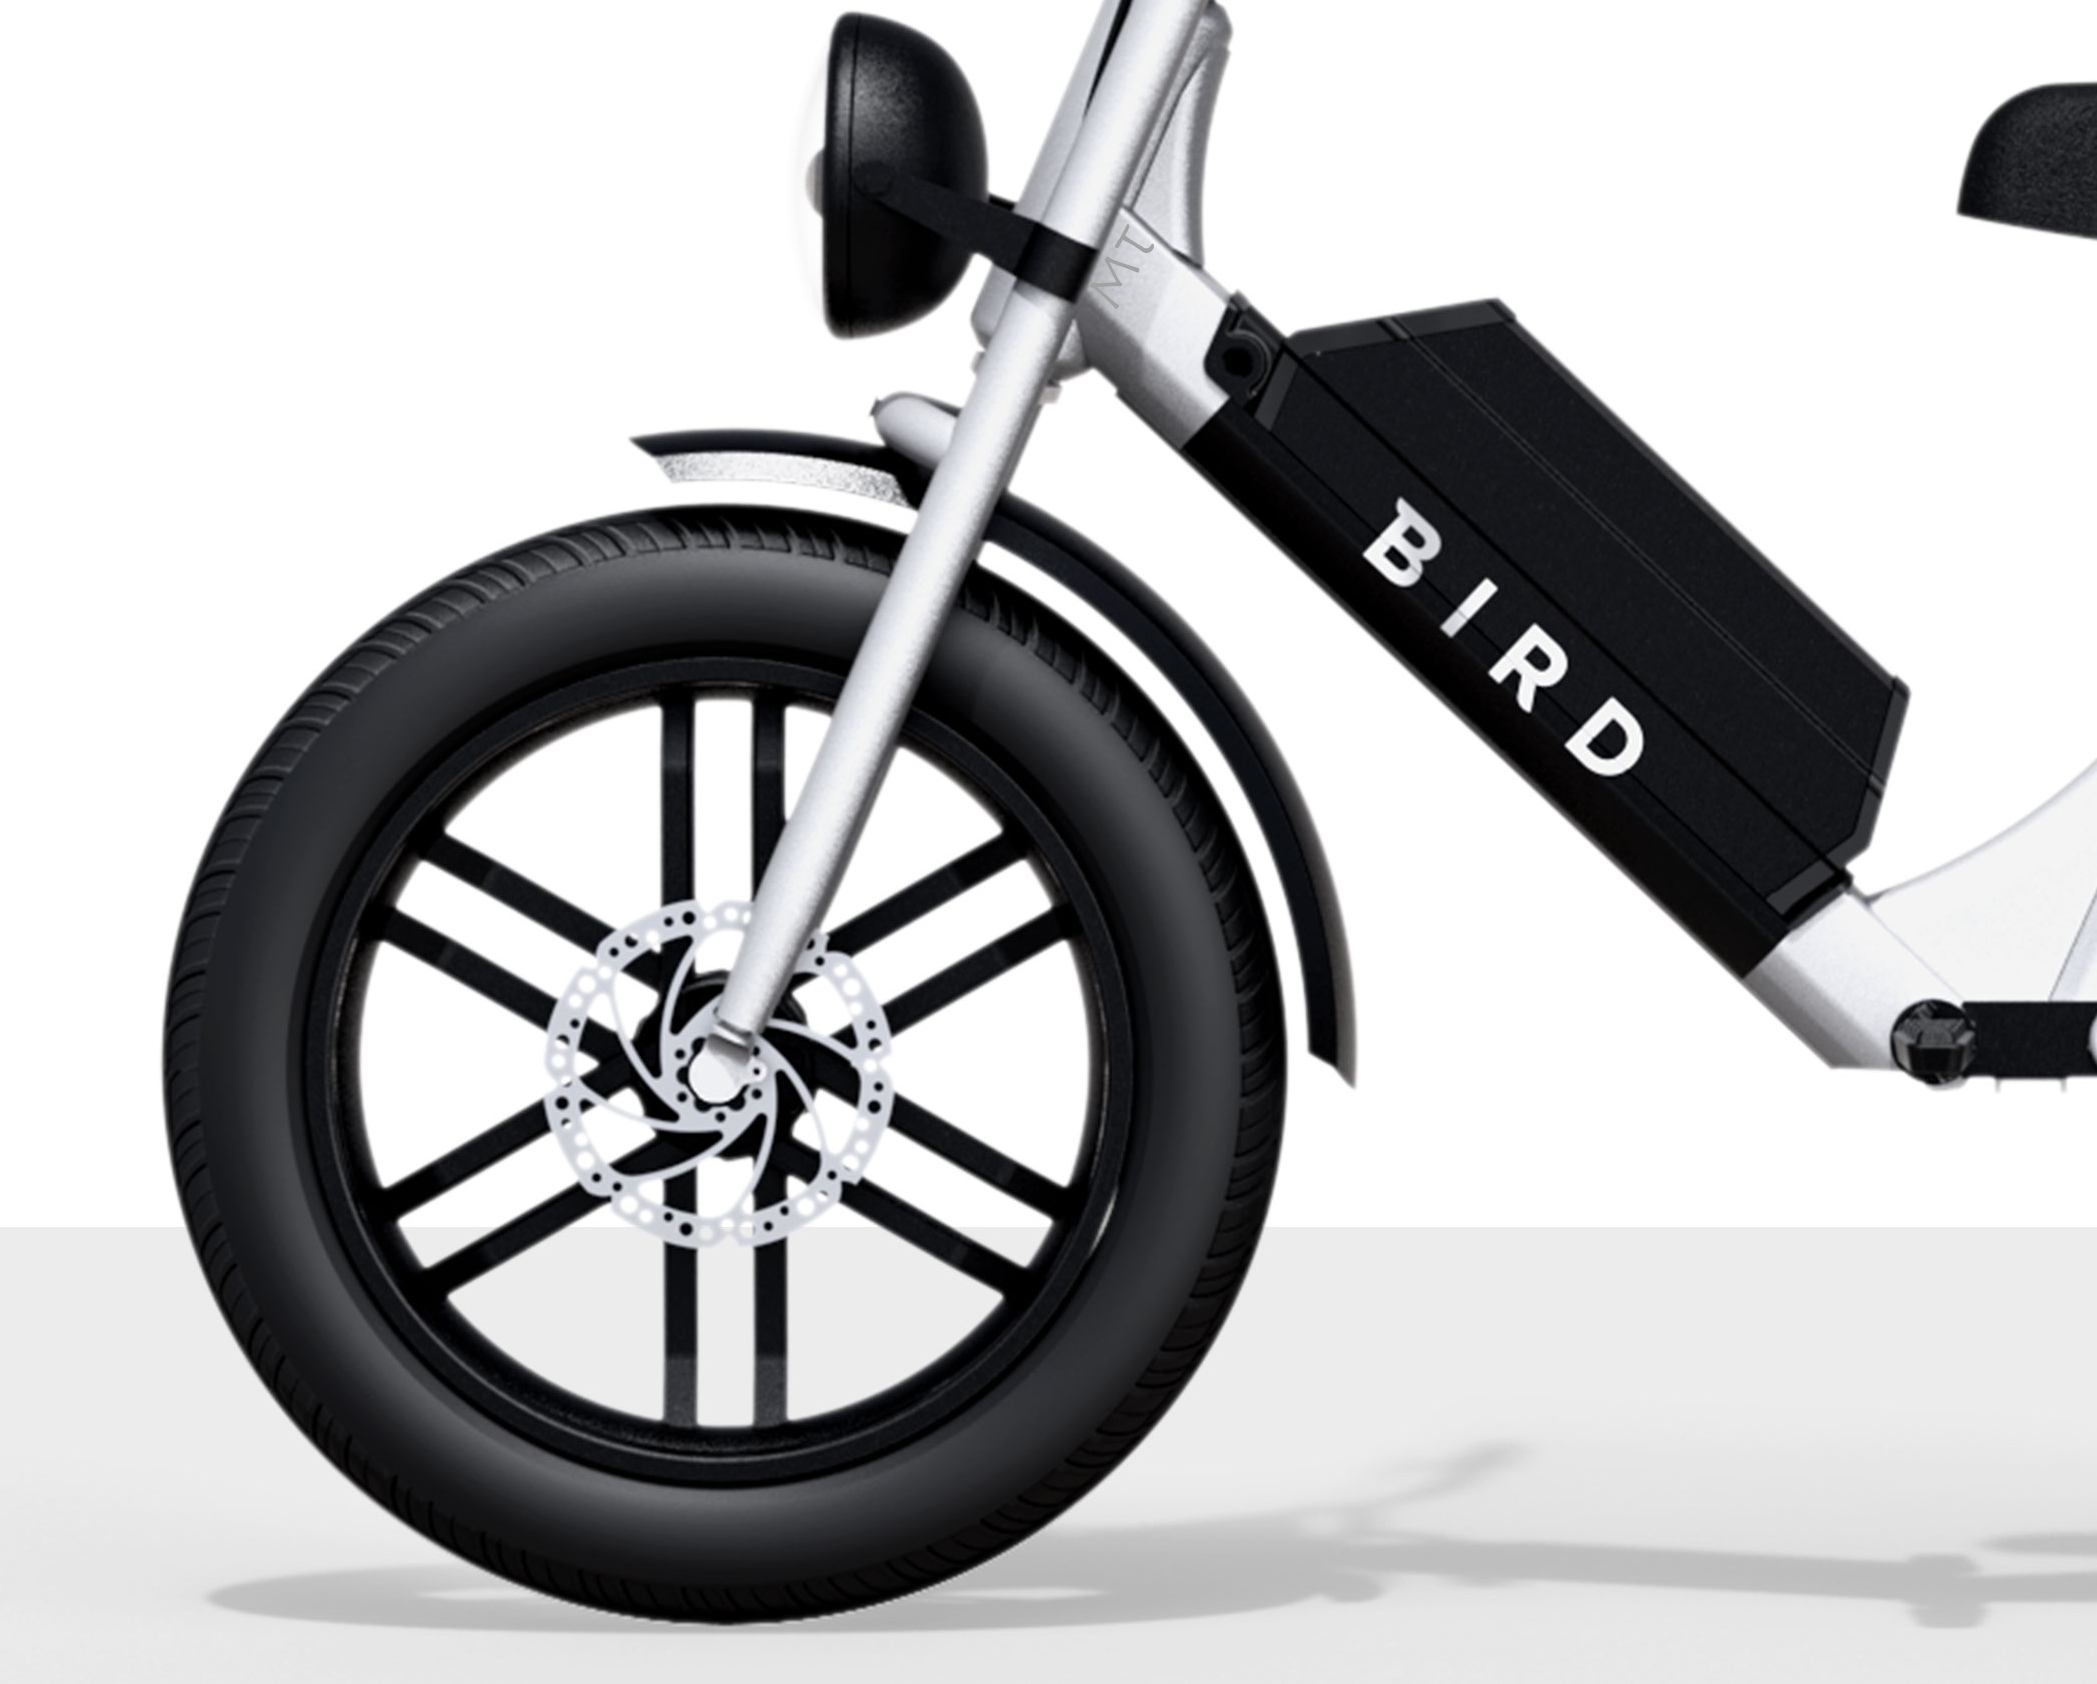 Bird Cruiser unveiled as mopedstyle electric bicycle with seating for two